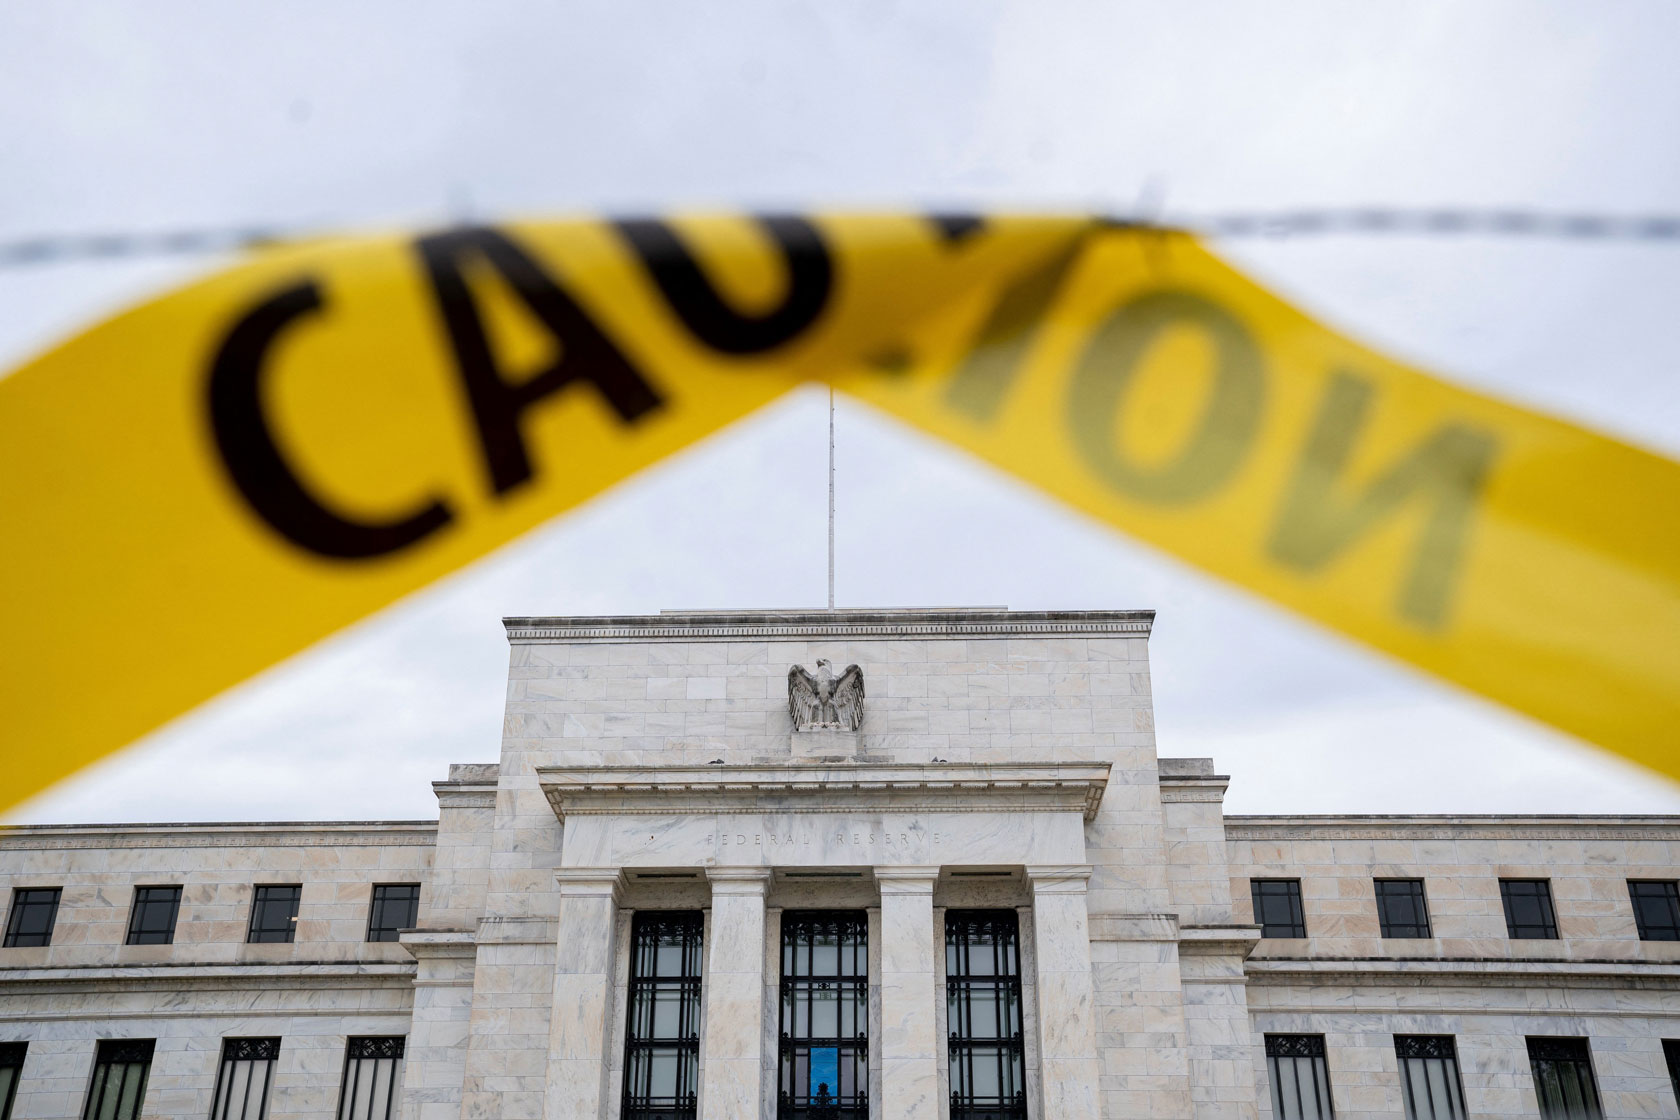 The U.S. Federal Reserve building is seen past caution tape in Washington, D.C.